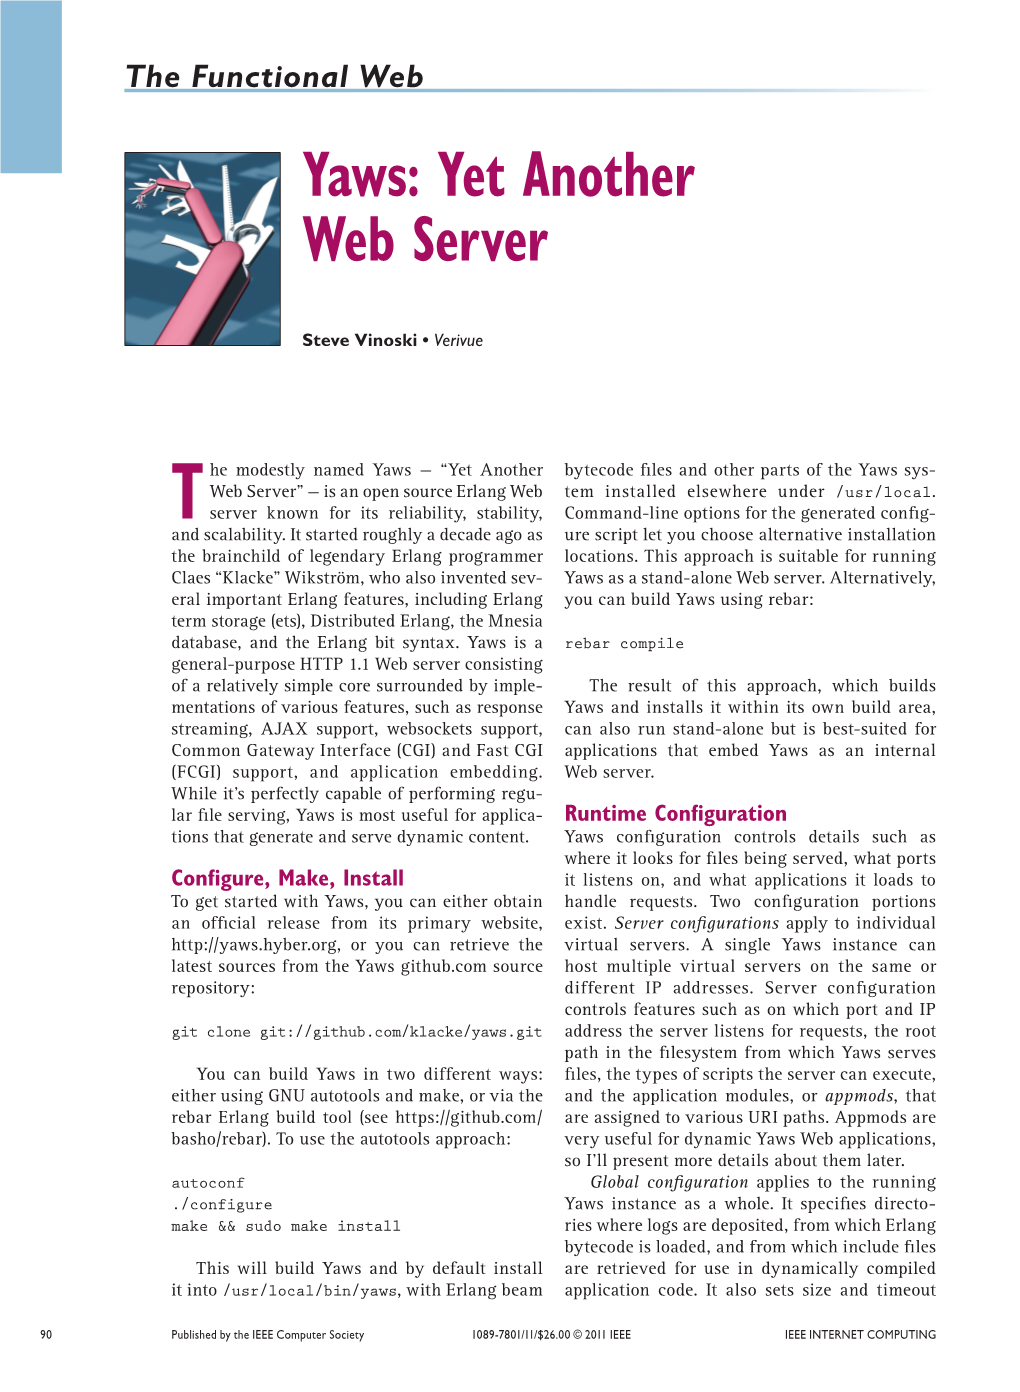 Yaws: Yet Another Web Server